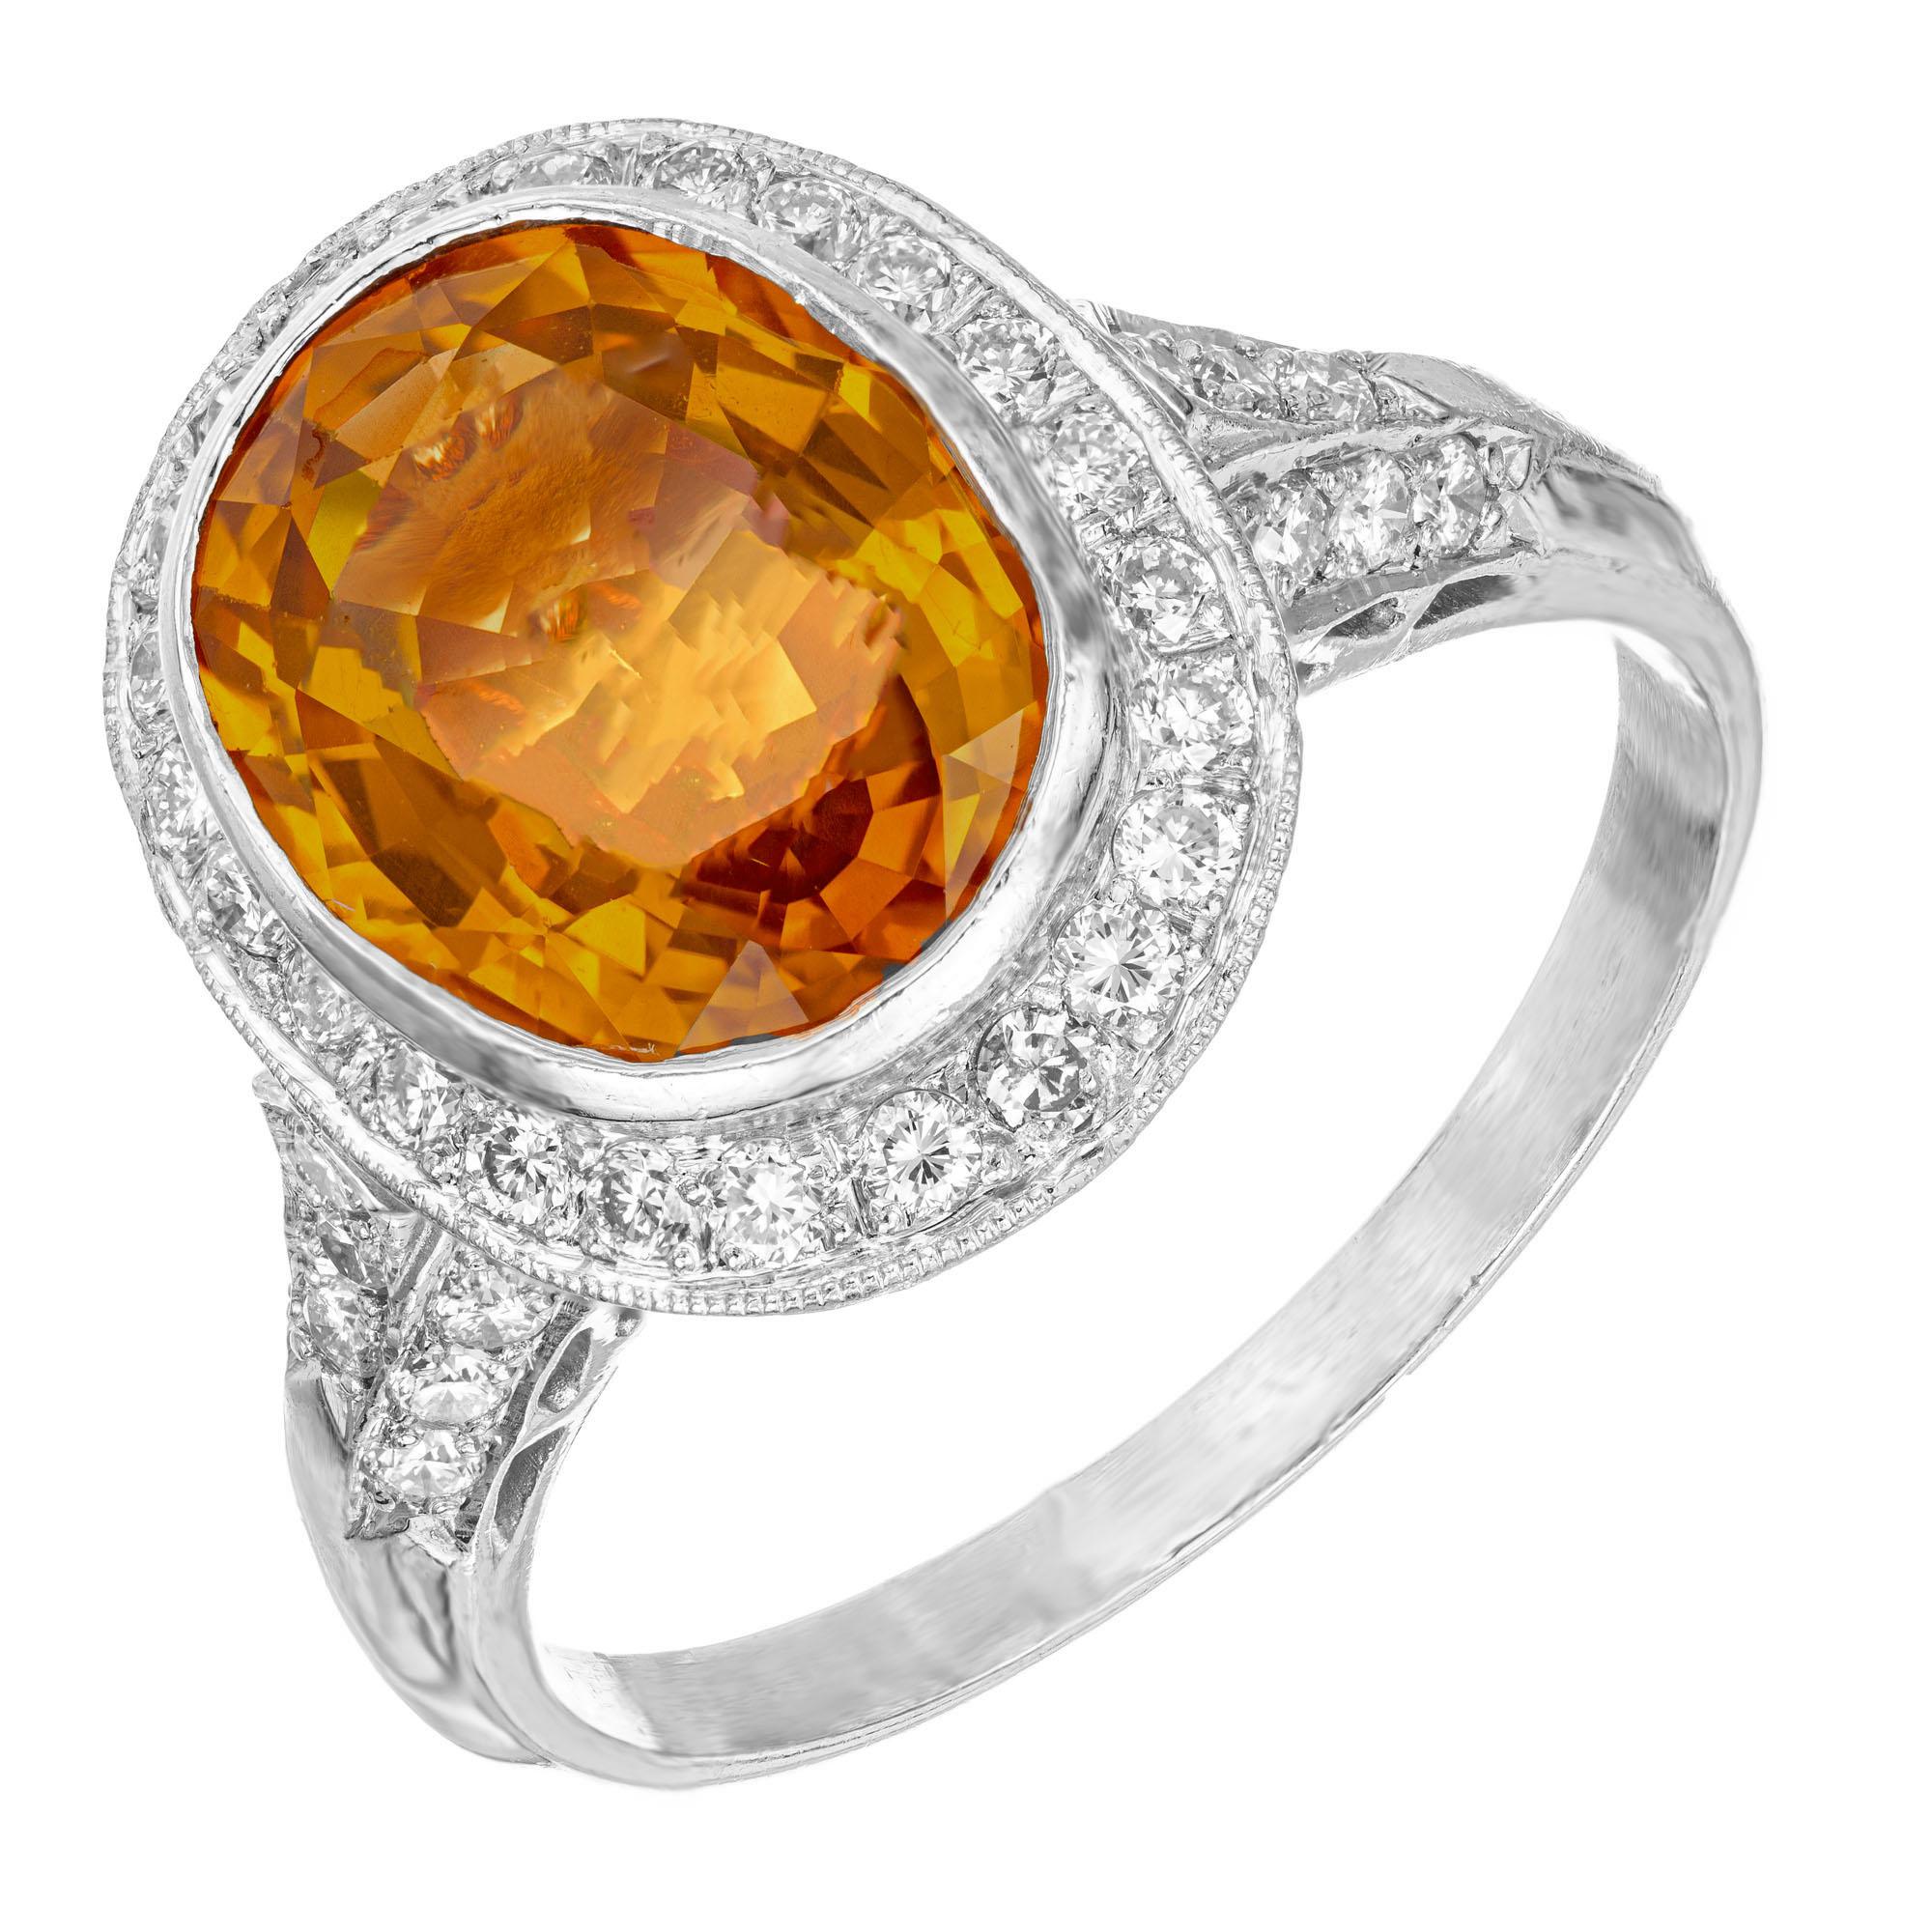 1970's Orange sapphire and diamond engagement ring. 4.00ct. certified oval orange center sapphire, in a bezel set platinum setting with a halo of full cut diamonds, accented with micro pave accent diamonds along the shank and crown. This AGTA